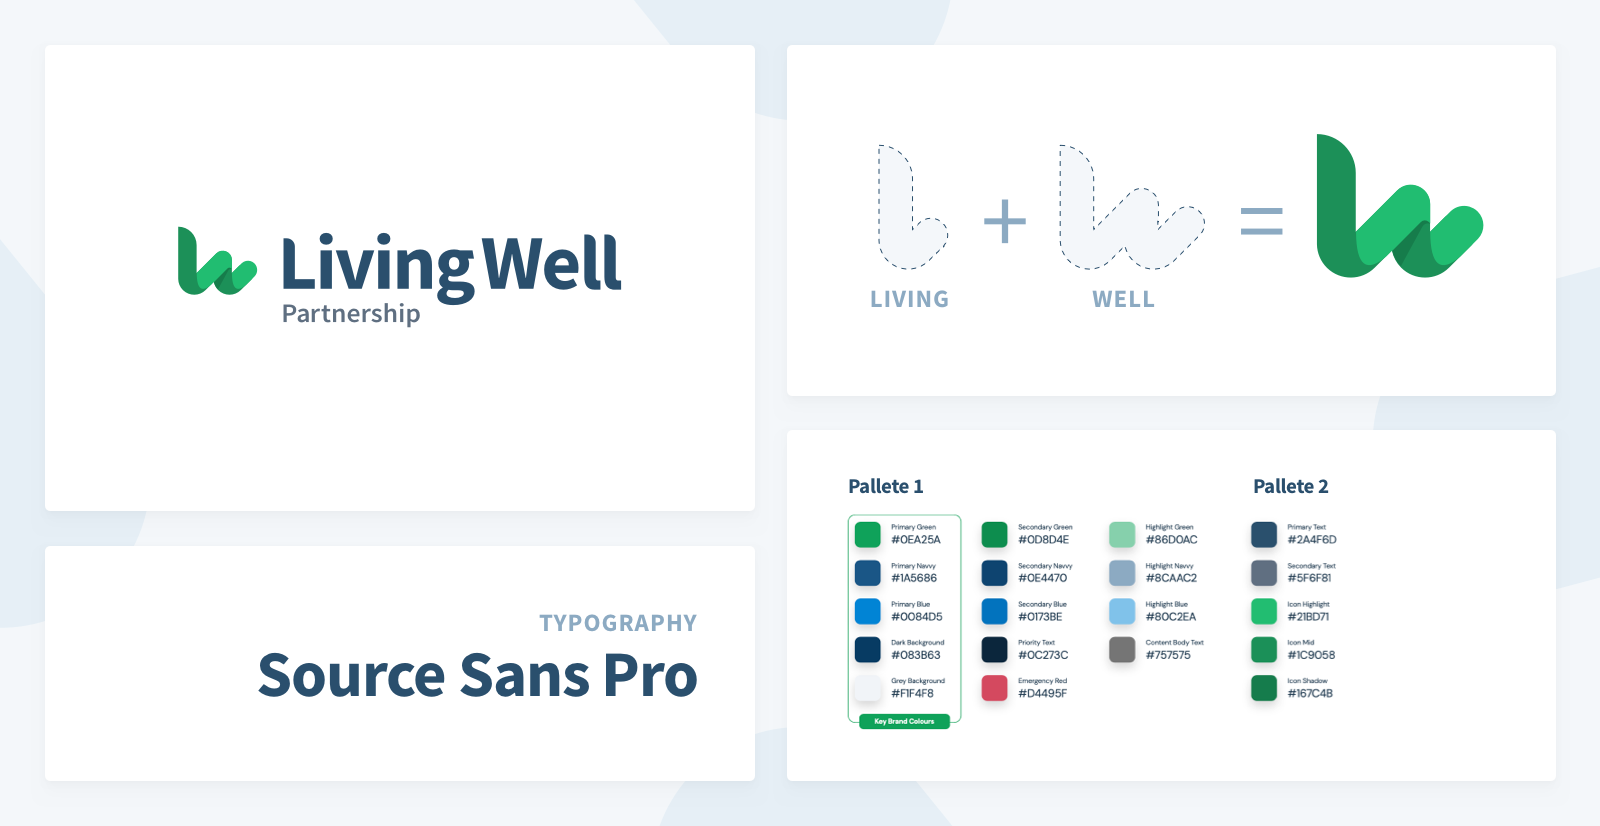 Visual identity for Living Well Partnership including, logo, typography and colour palette.